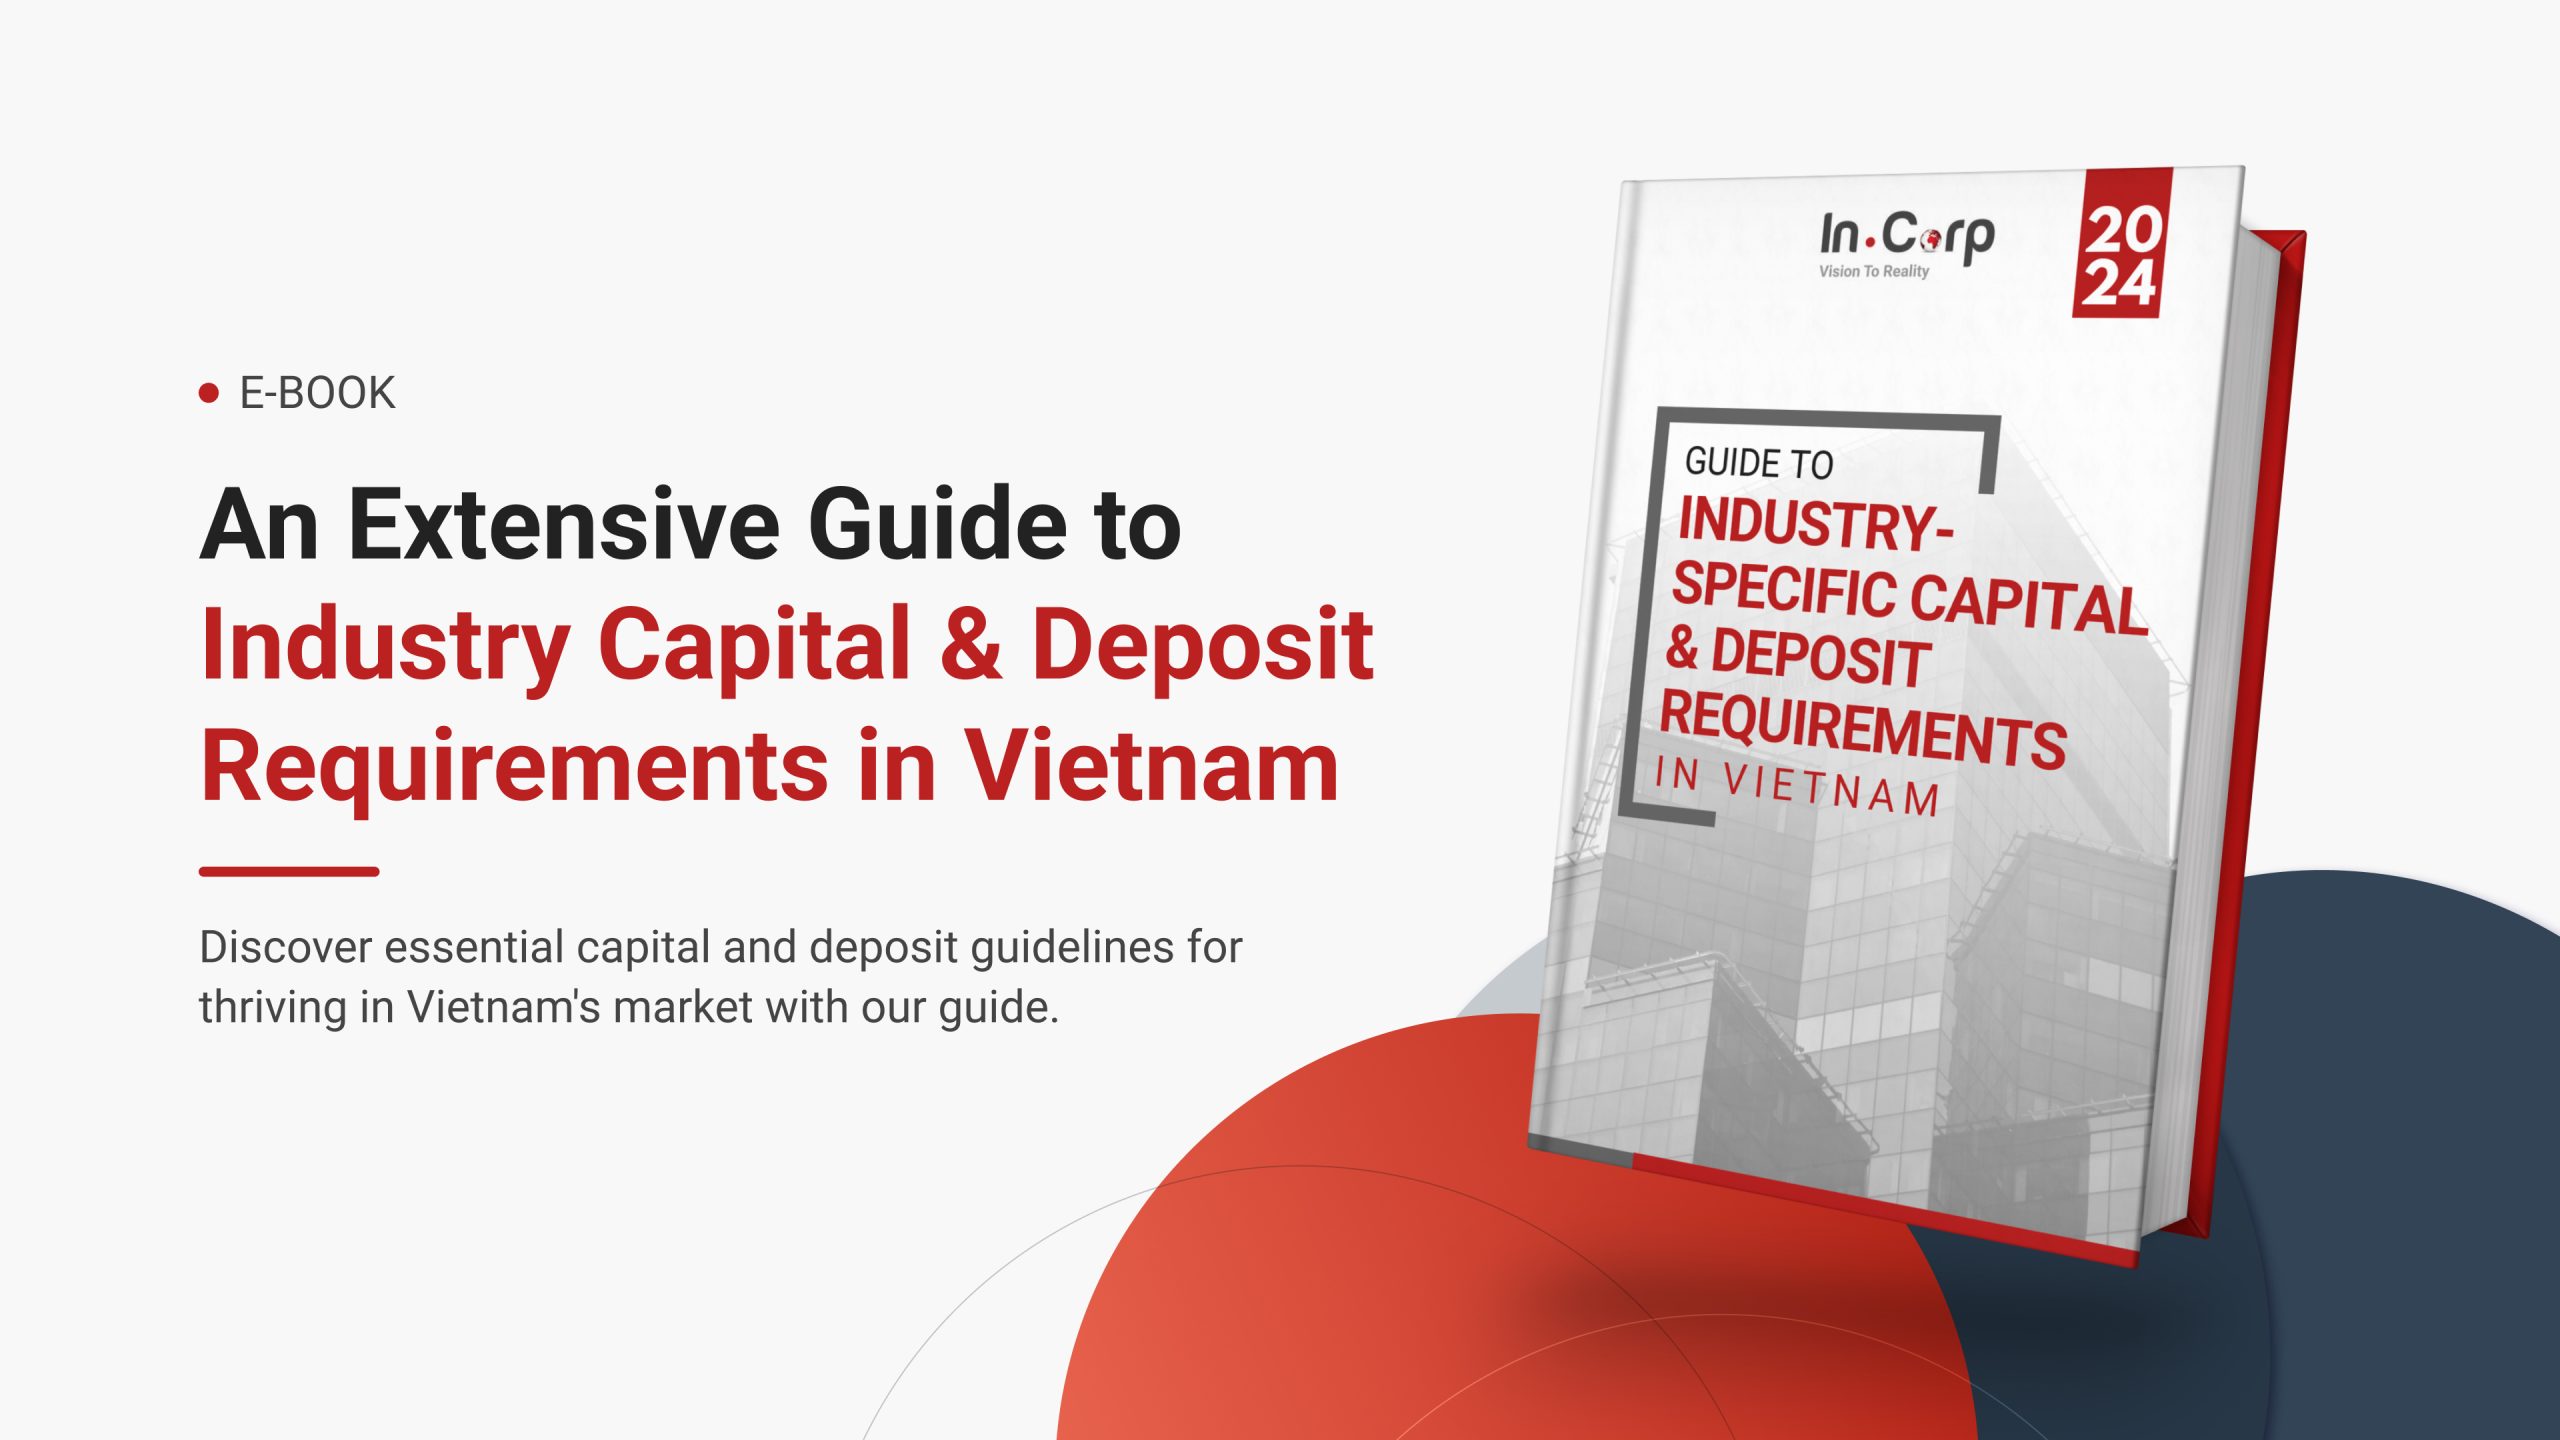 An Extensive Guide to Industry Capital & Deposit Requirements in Vietnam